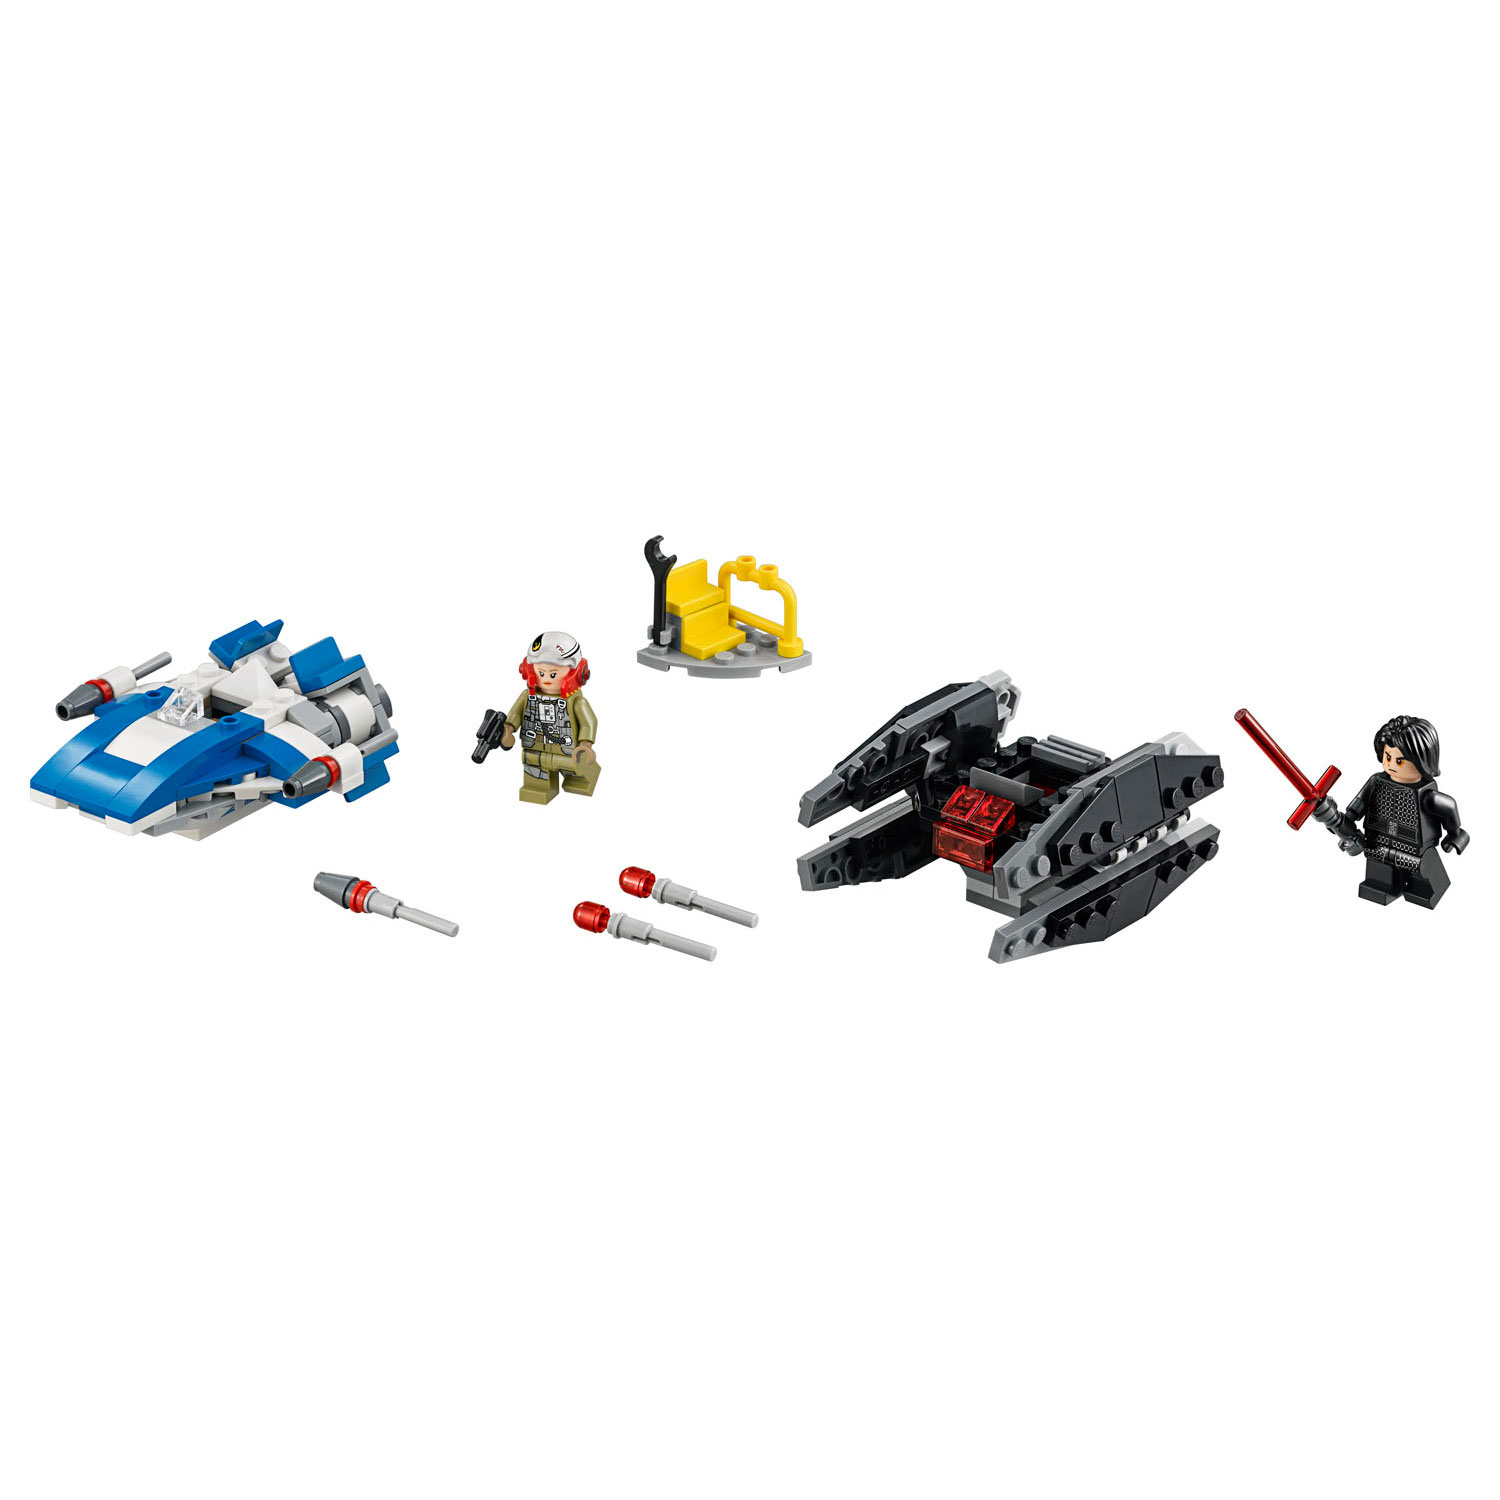 LEGO Star Wars 75196 A-wing vs. TIE Silencer microfighters